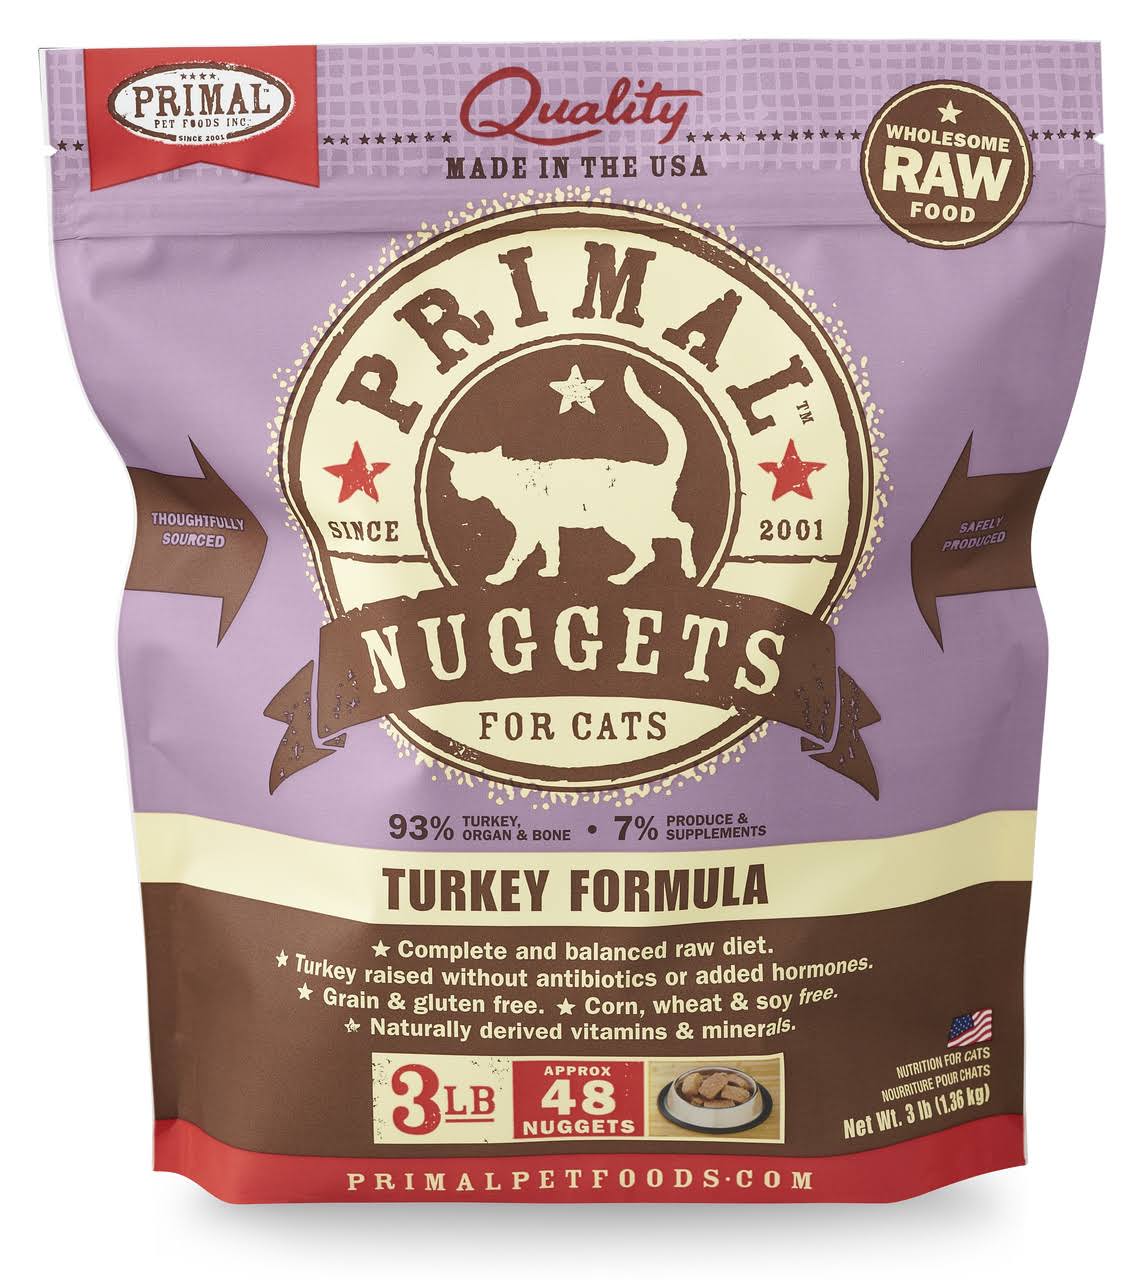 Primal Frozen Raw Turkey Nuggets for Cats 3 LB